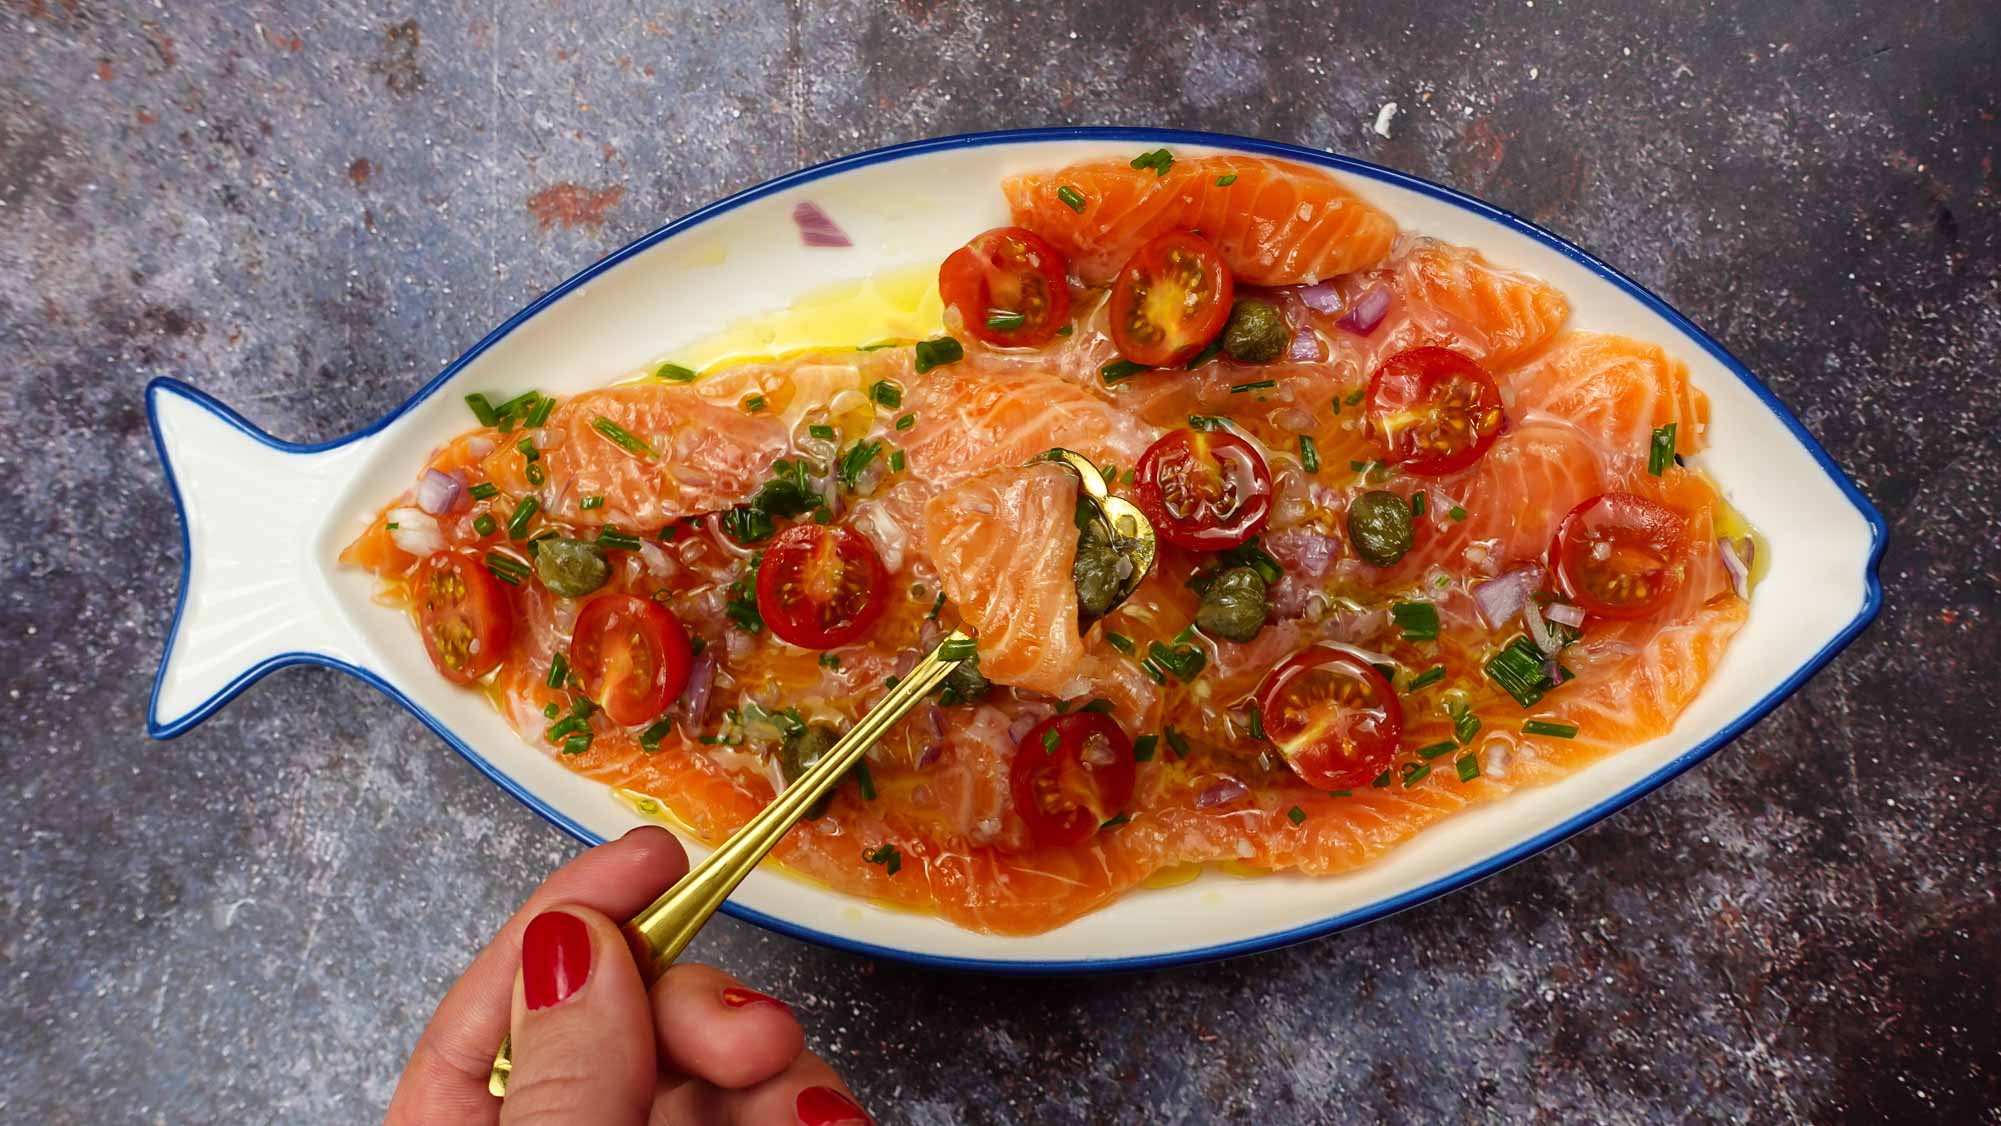 Fresh Salmon Carpaccio on a plate with a small spoon.